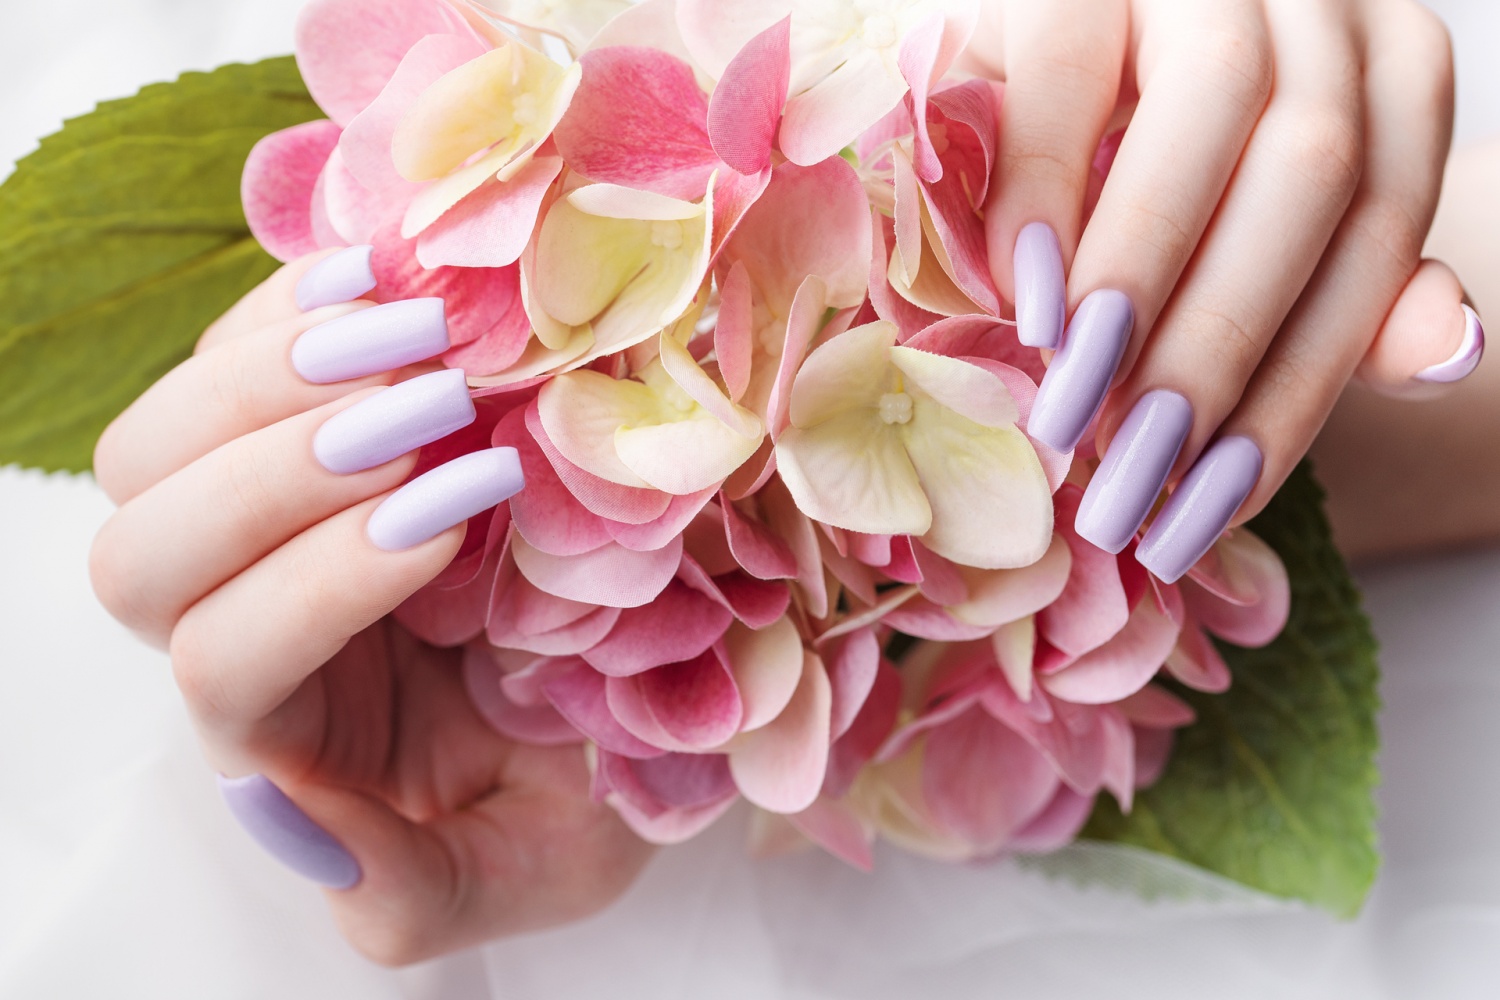 Springtime Nail Problems to Watch Out For